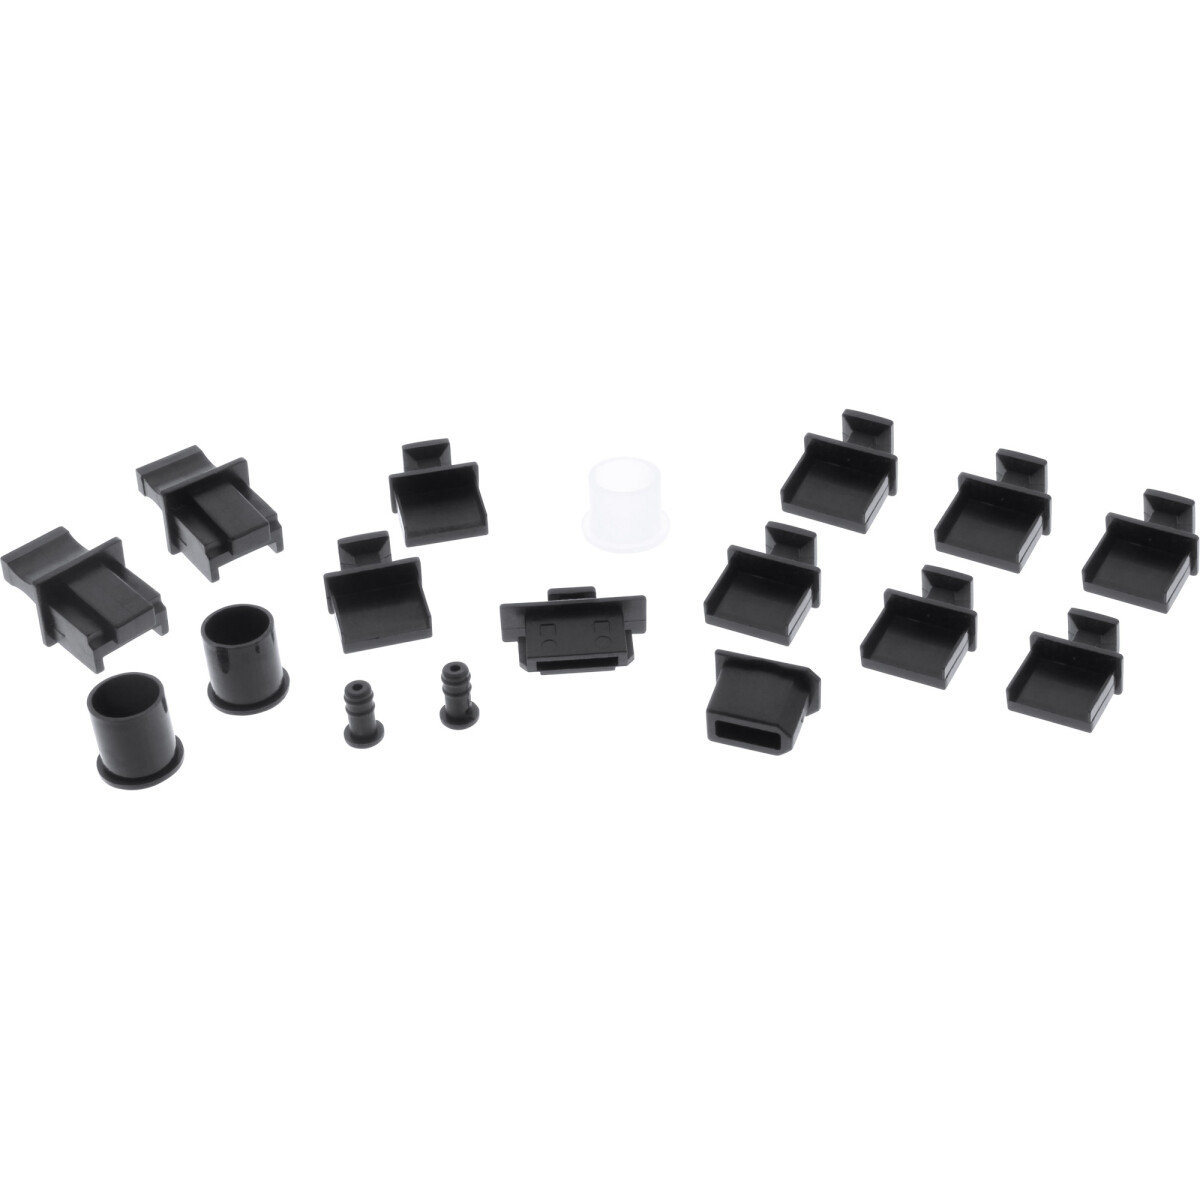 InLine® Dust Cover Set for Computer Interfaces, 17pcs.